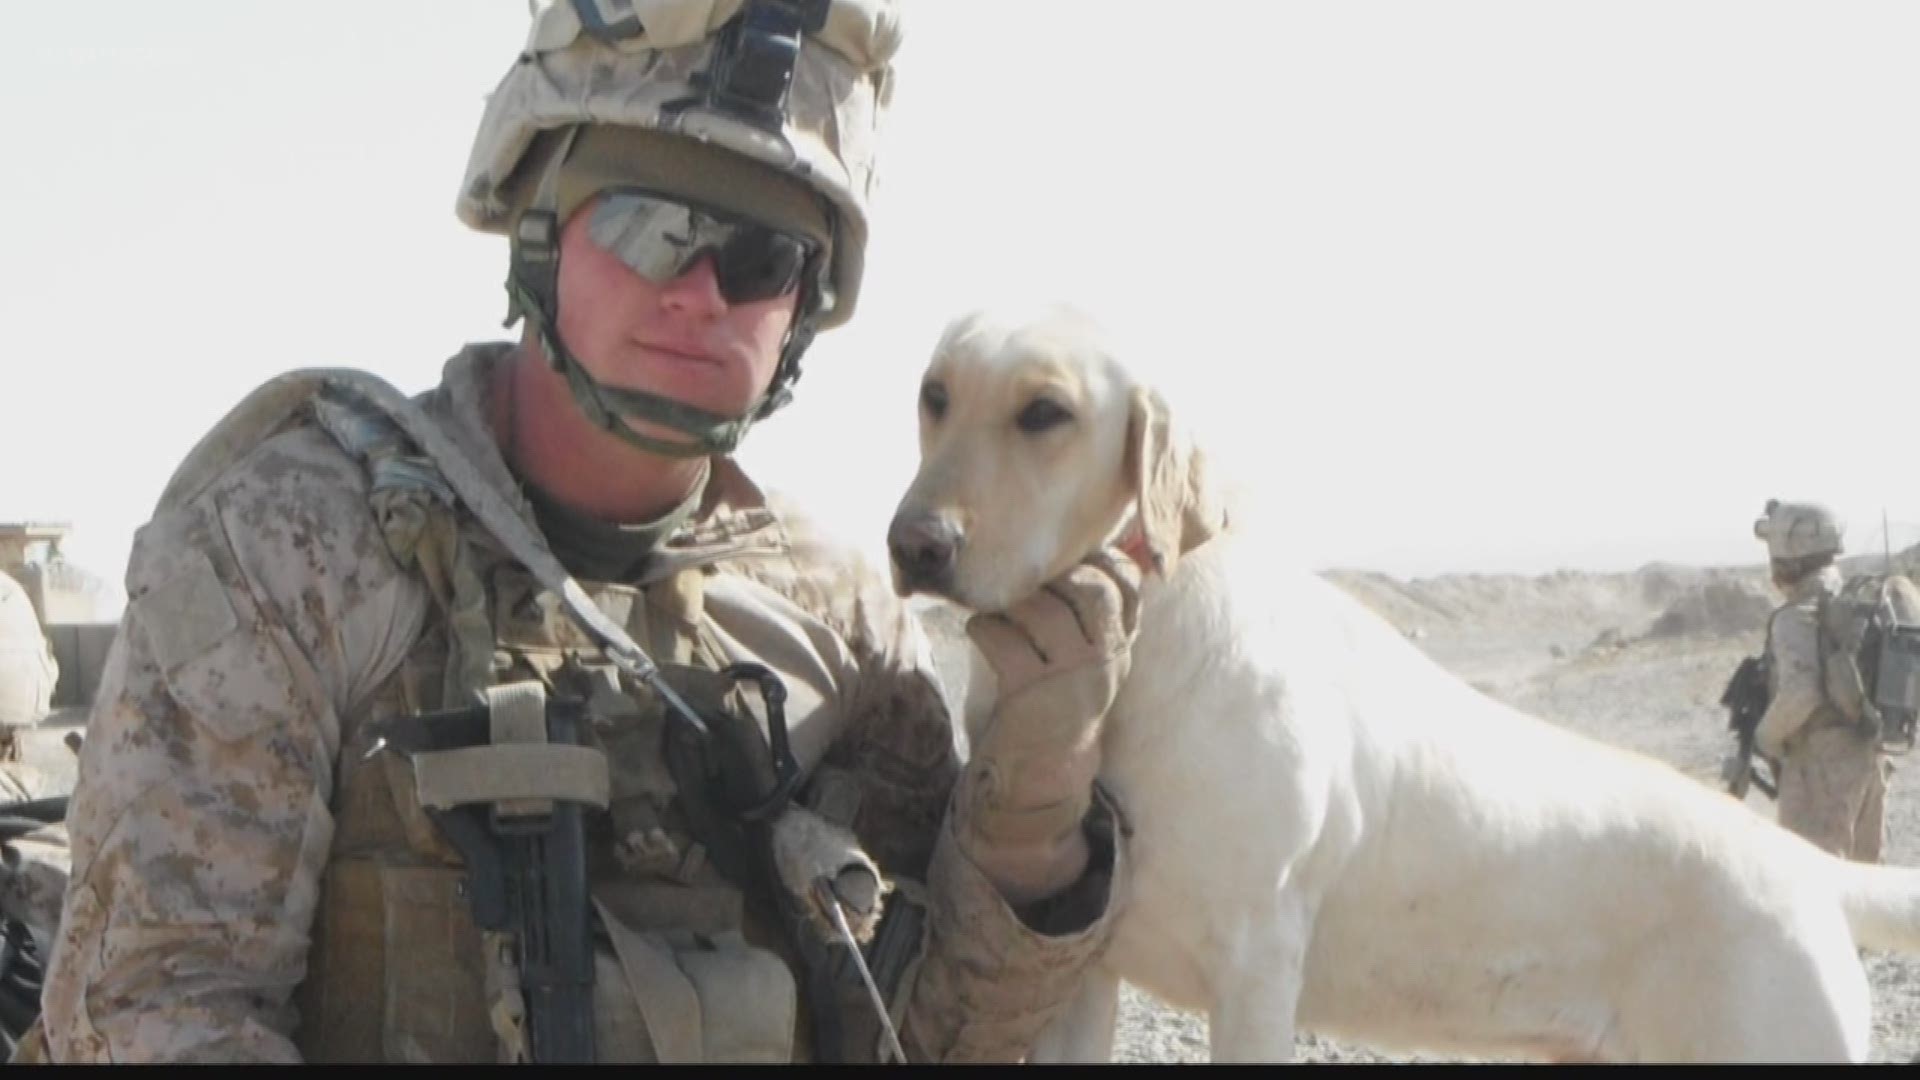 KREM 2's Taylor Viydo spoke with that marine and joins us now with more on the heartwarming story.